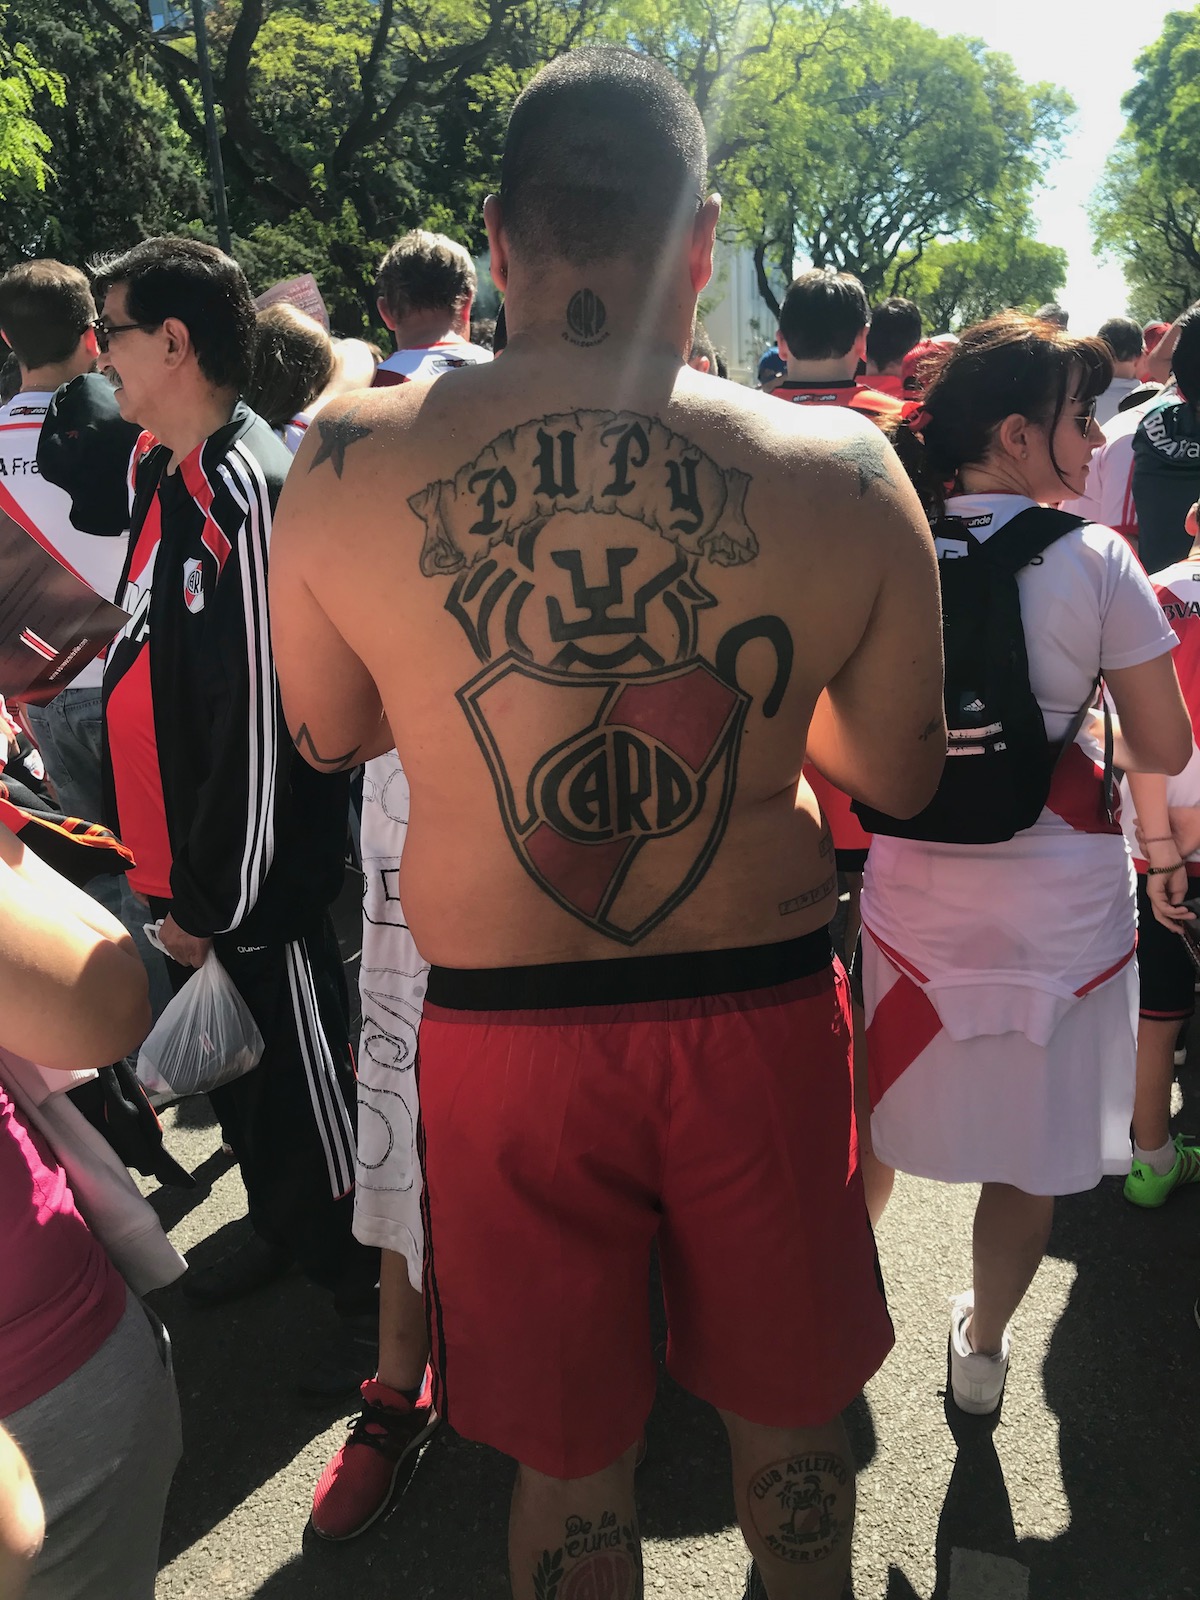 A football fanatic shows off a large crest of his club's crest, tattooed on his back in Buenos Aires, Argentina.